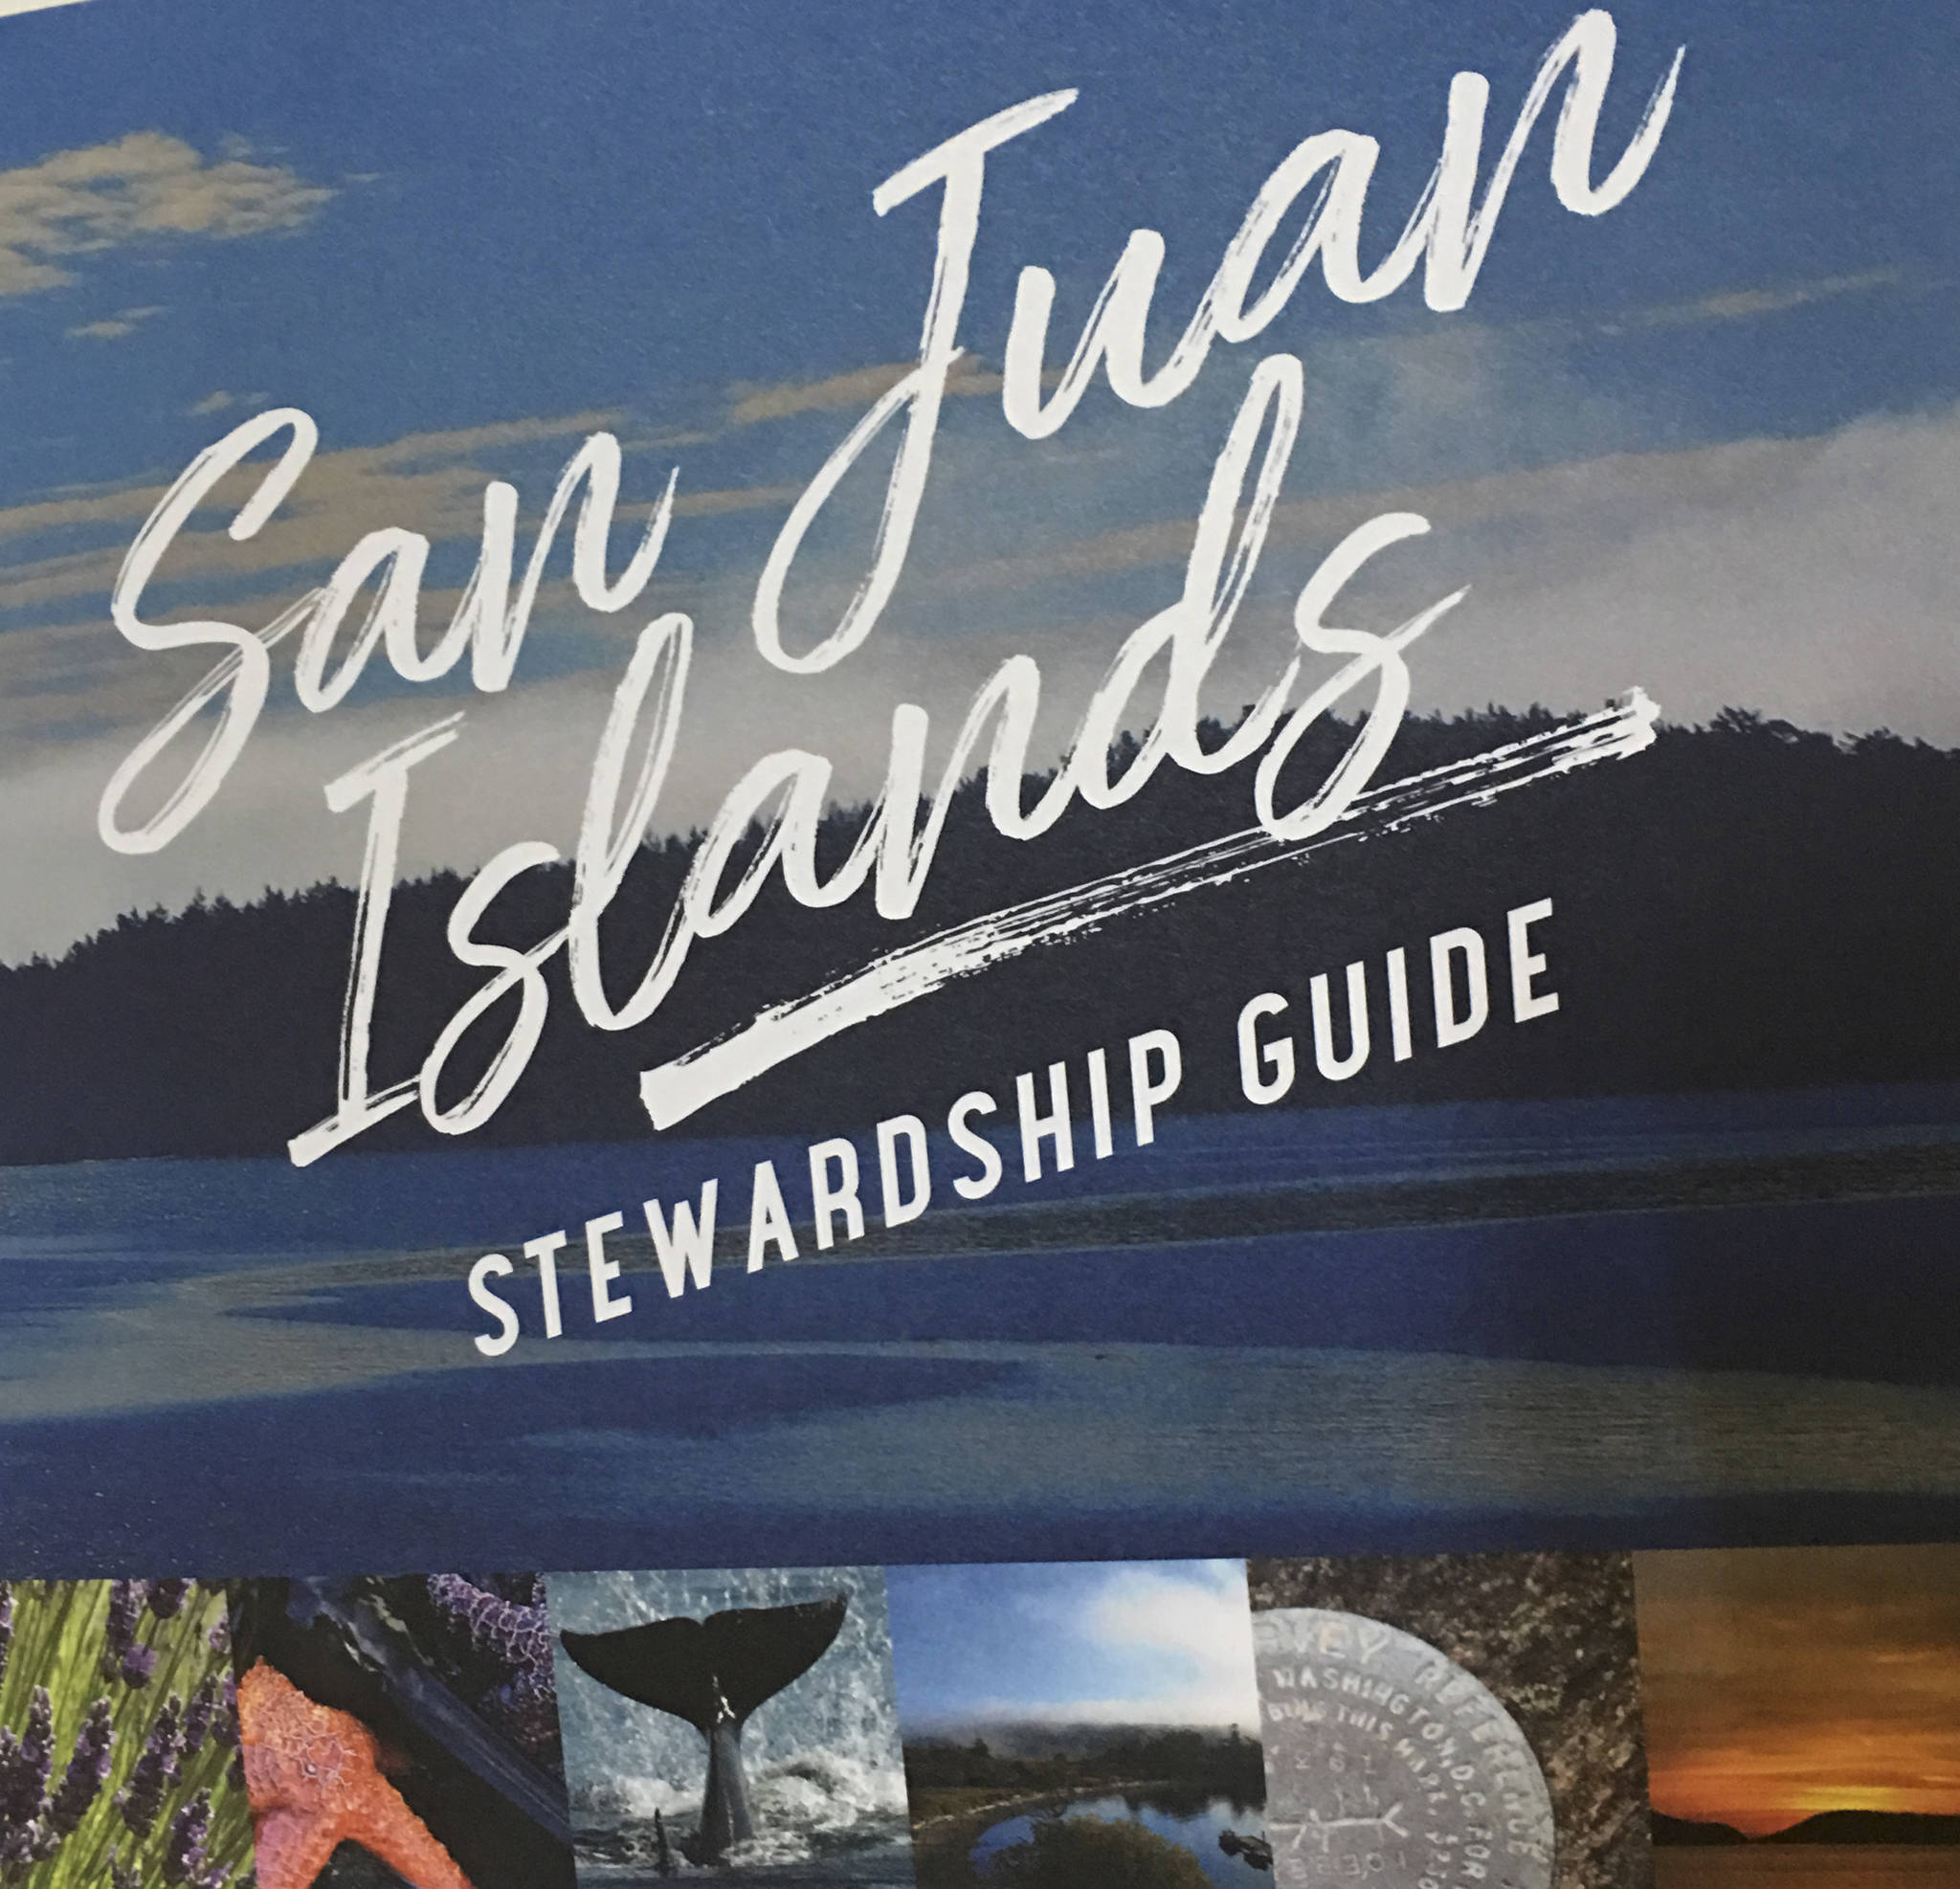 Stewardship Guide informs guests about island living